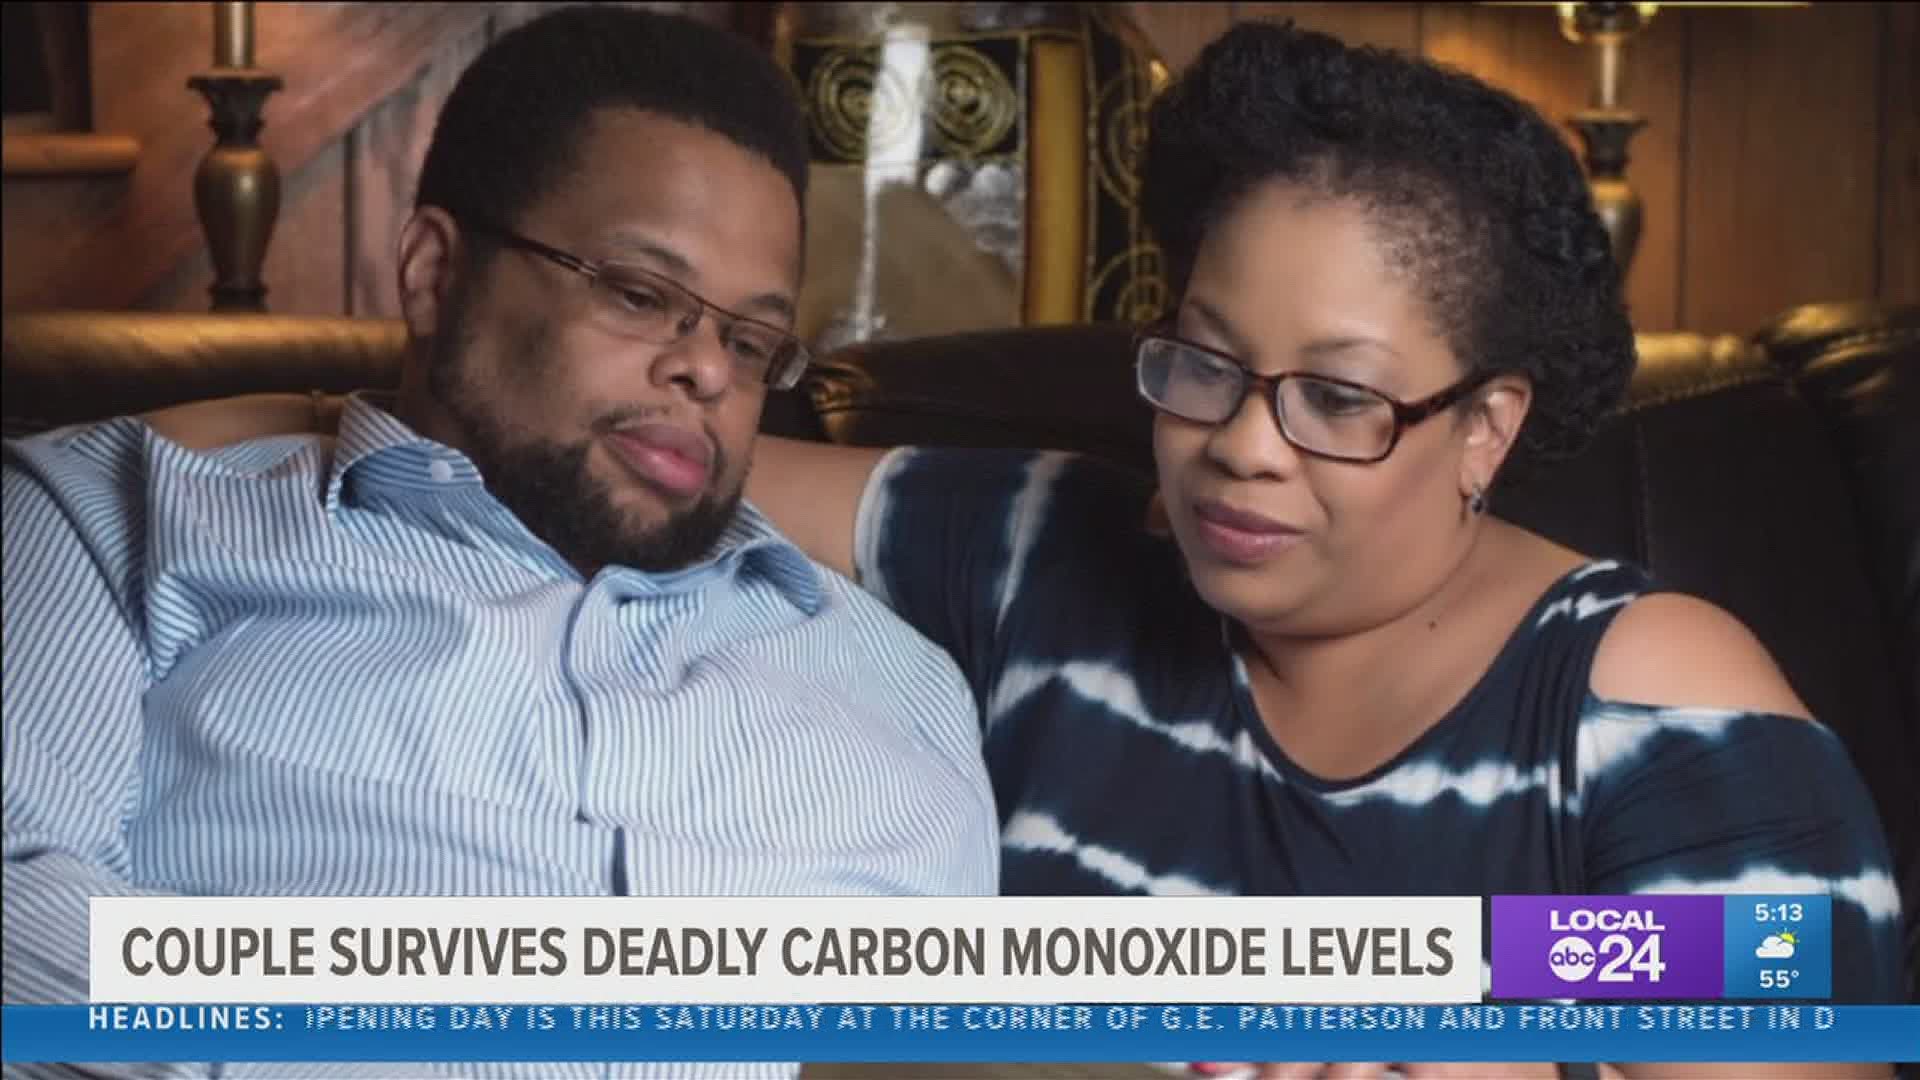 Memphis firefighters detected deadly amounts of carbon monoxide in their home.